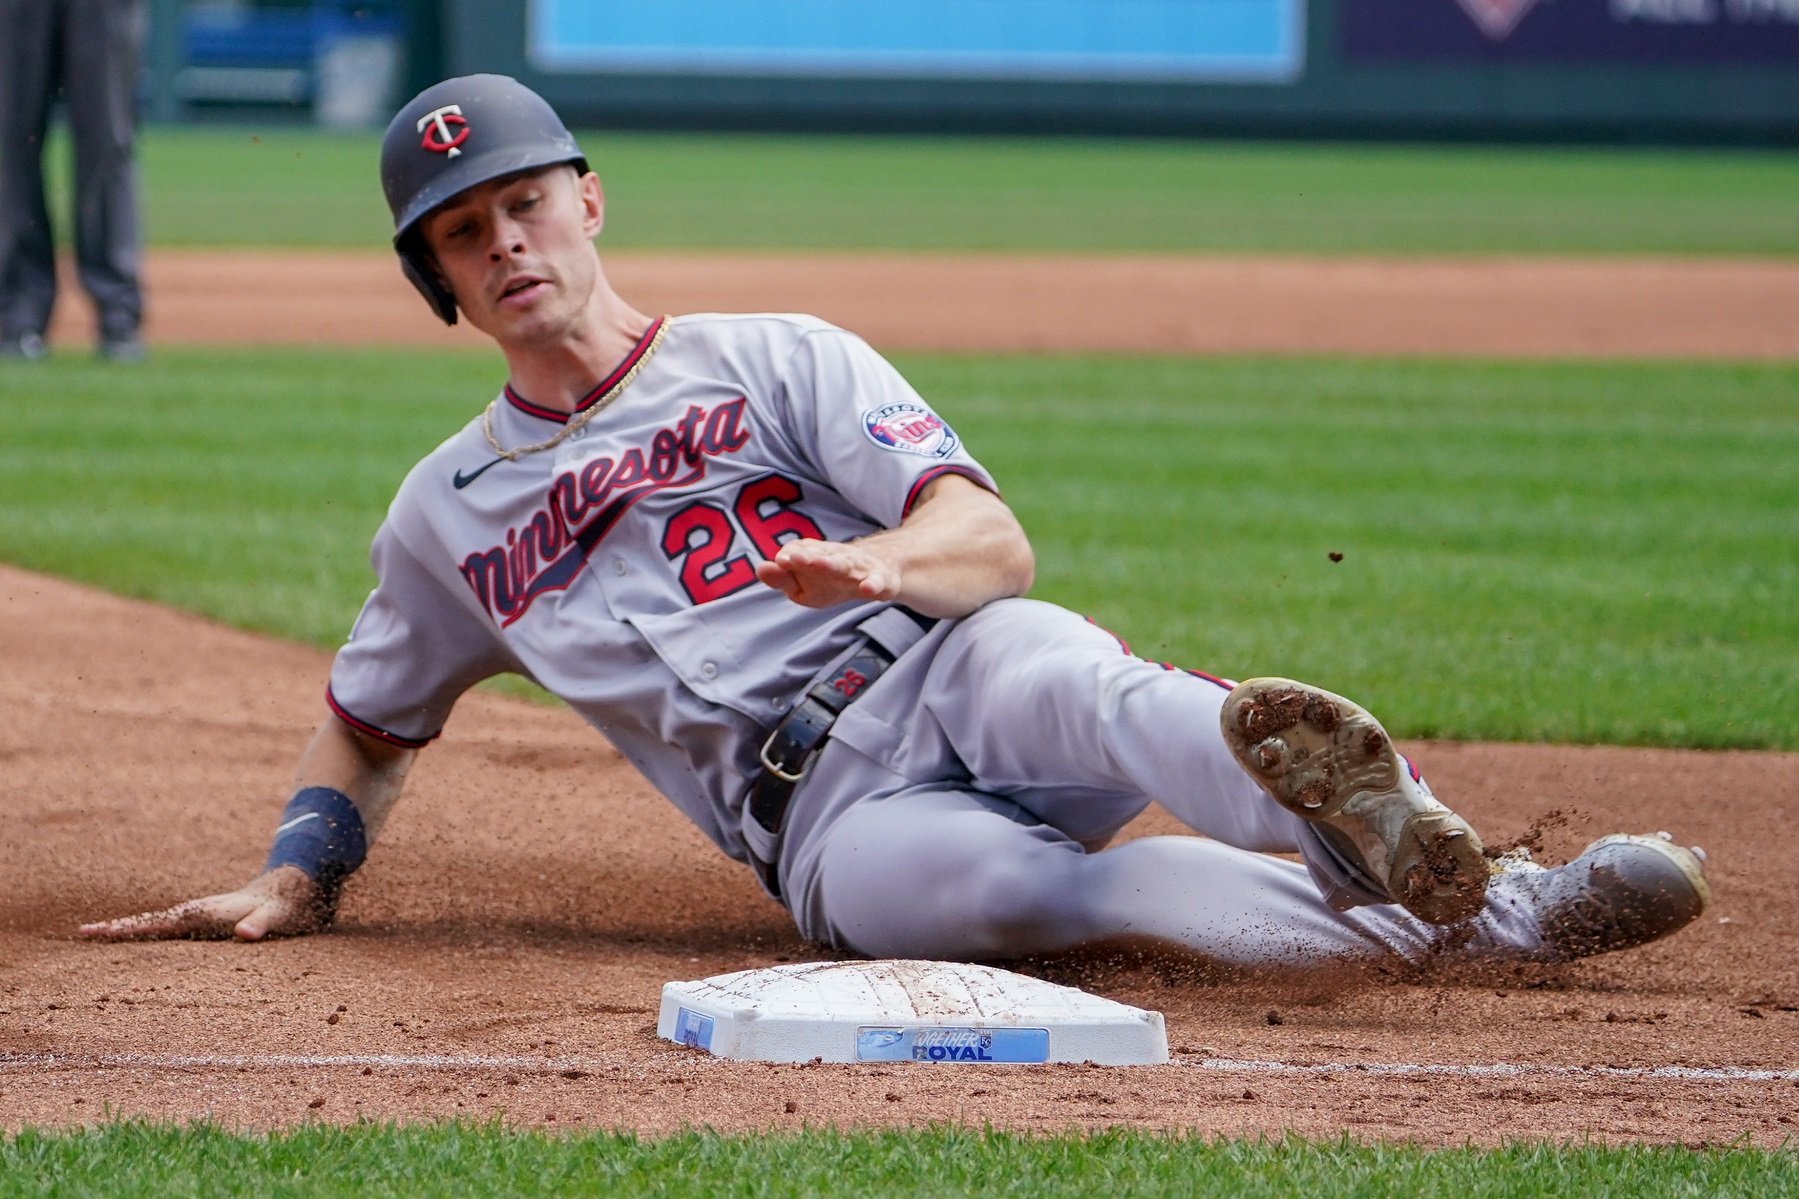 Max Kepler's big move -- from Germany to Minnesota Twins - ESPN